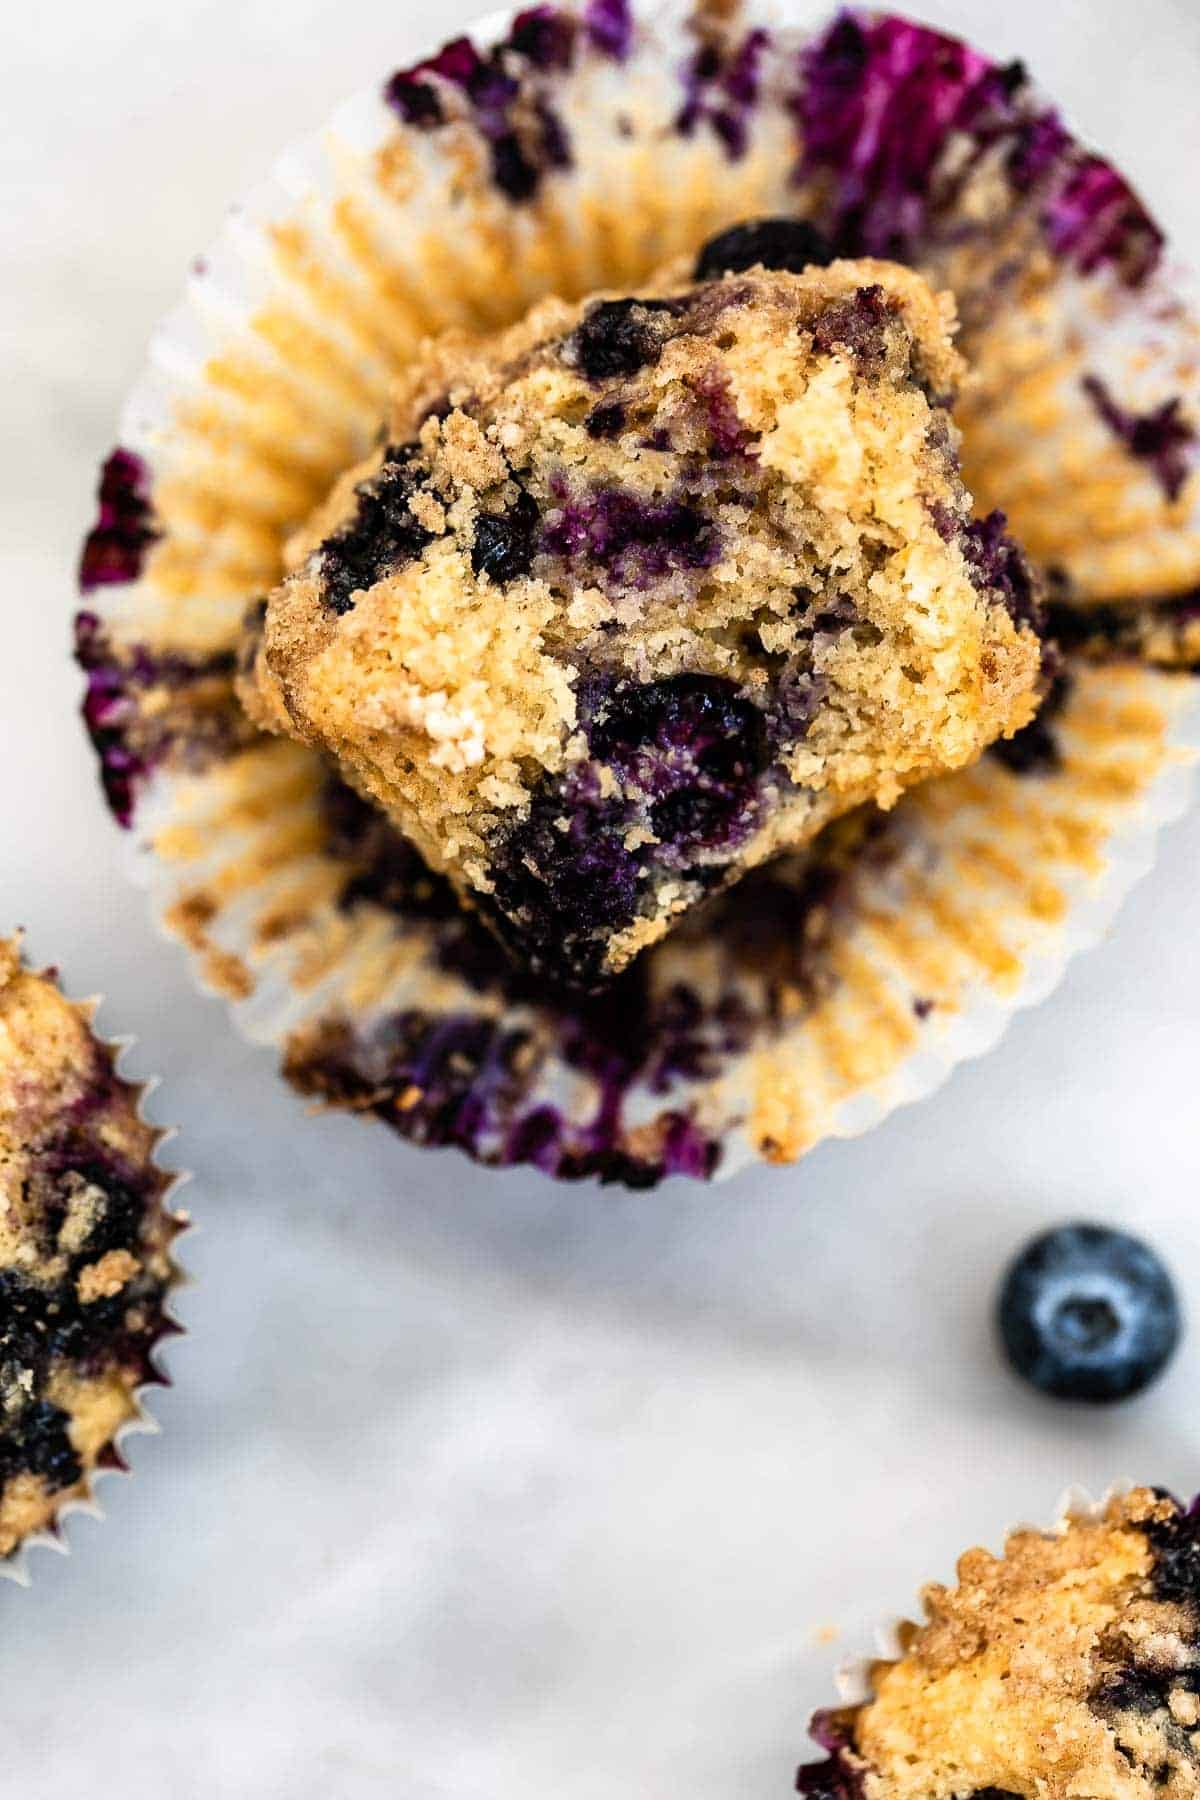 Blueberry muffin on the side.